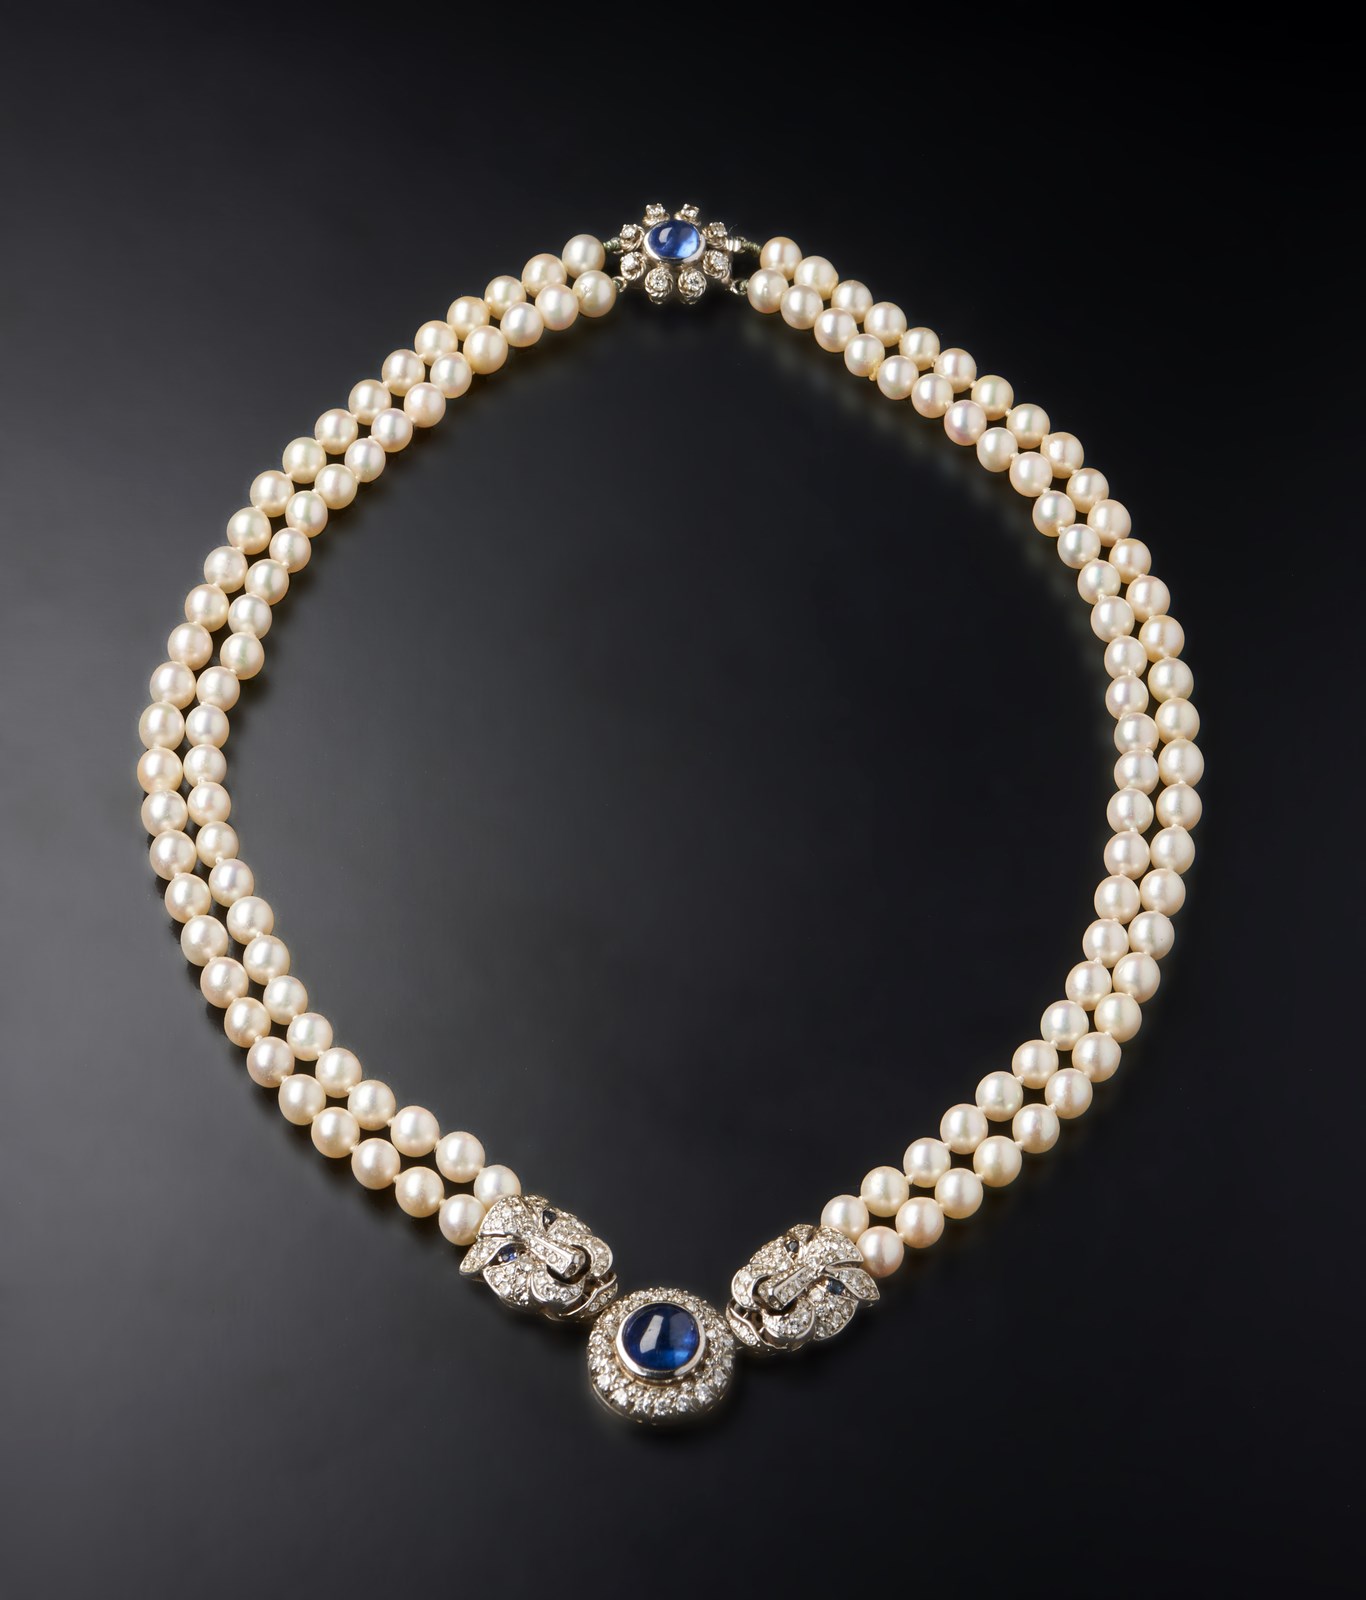 Impressive necklace with two strands of 7.00 mm spherical white pearls with central pendant with blue sapphire cabochon and mixed cut diamonds (huit huit and brilliant) of about 3.00 carats total.  (. )